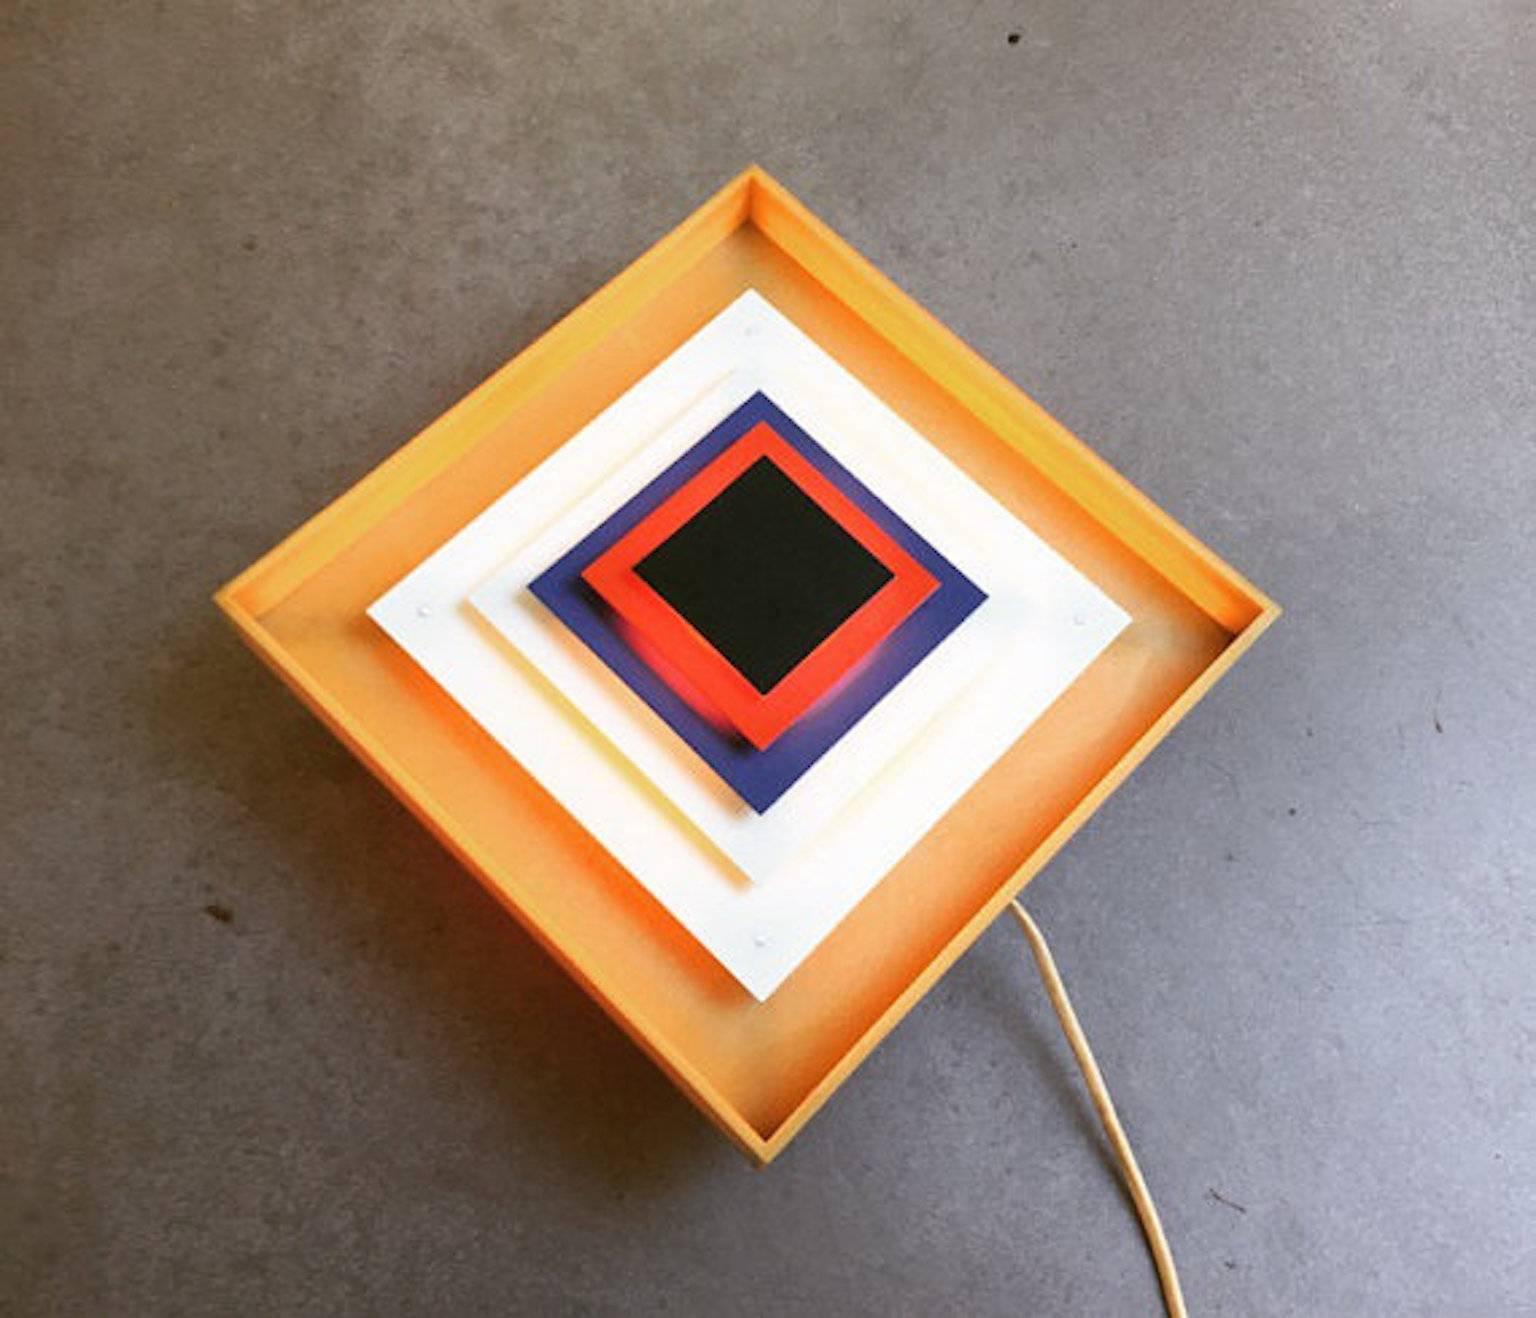 Rare designer sconce from Danish Lyfa designed by the world known Bent Karlby.

Op-art wall lights with layered back-lit metal squares made with a plastic frame and painted metal squares. 

This light is designed for multiply use - on a shelf,